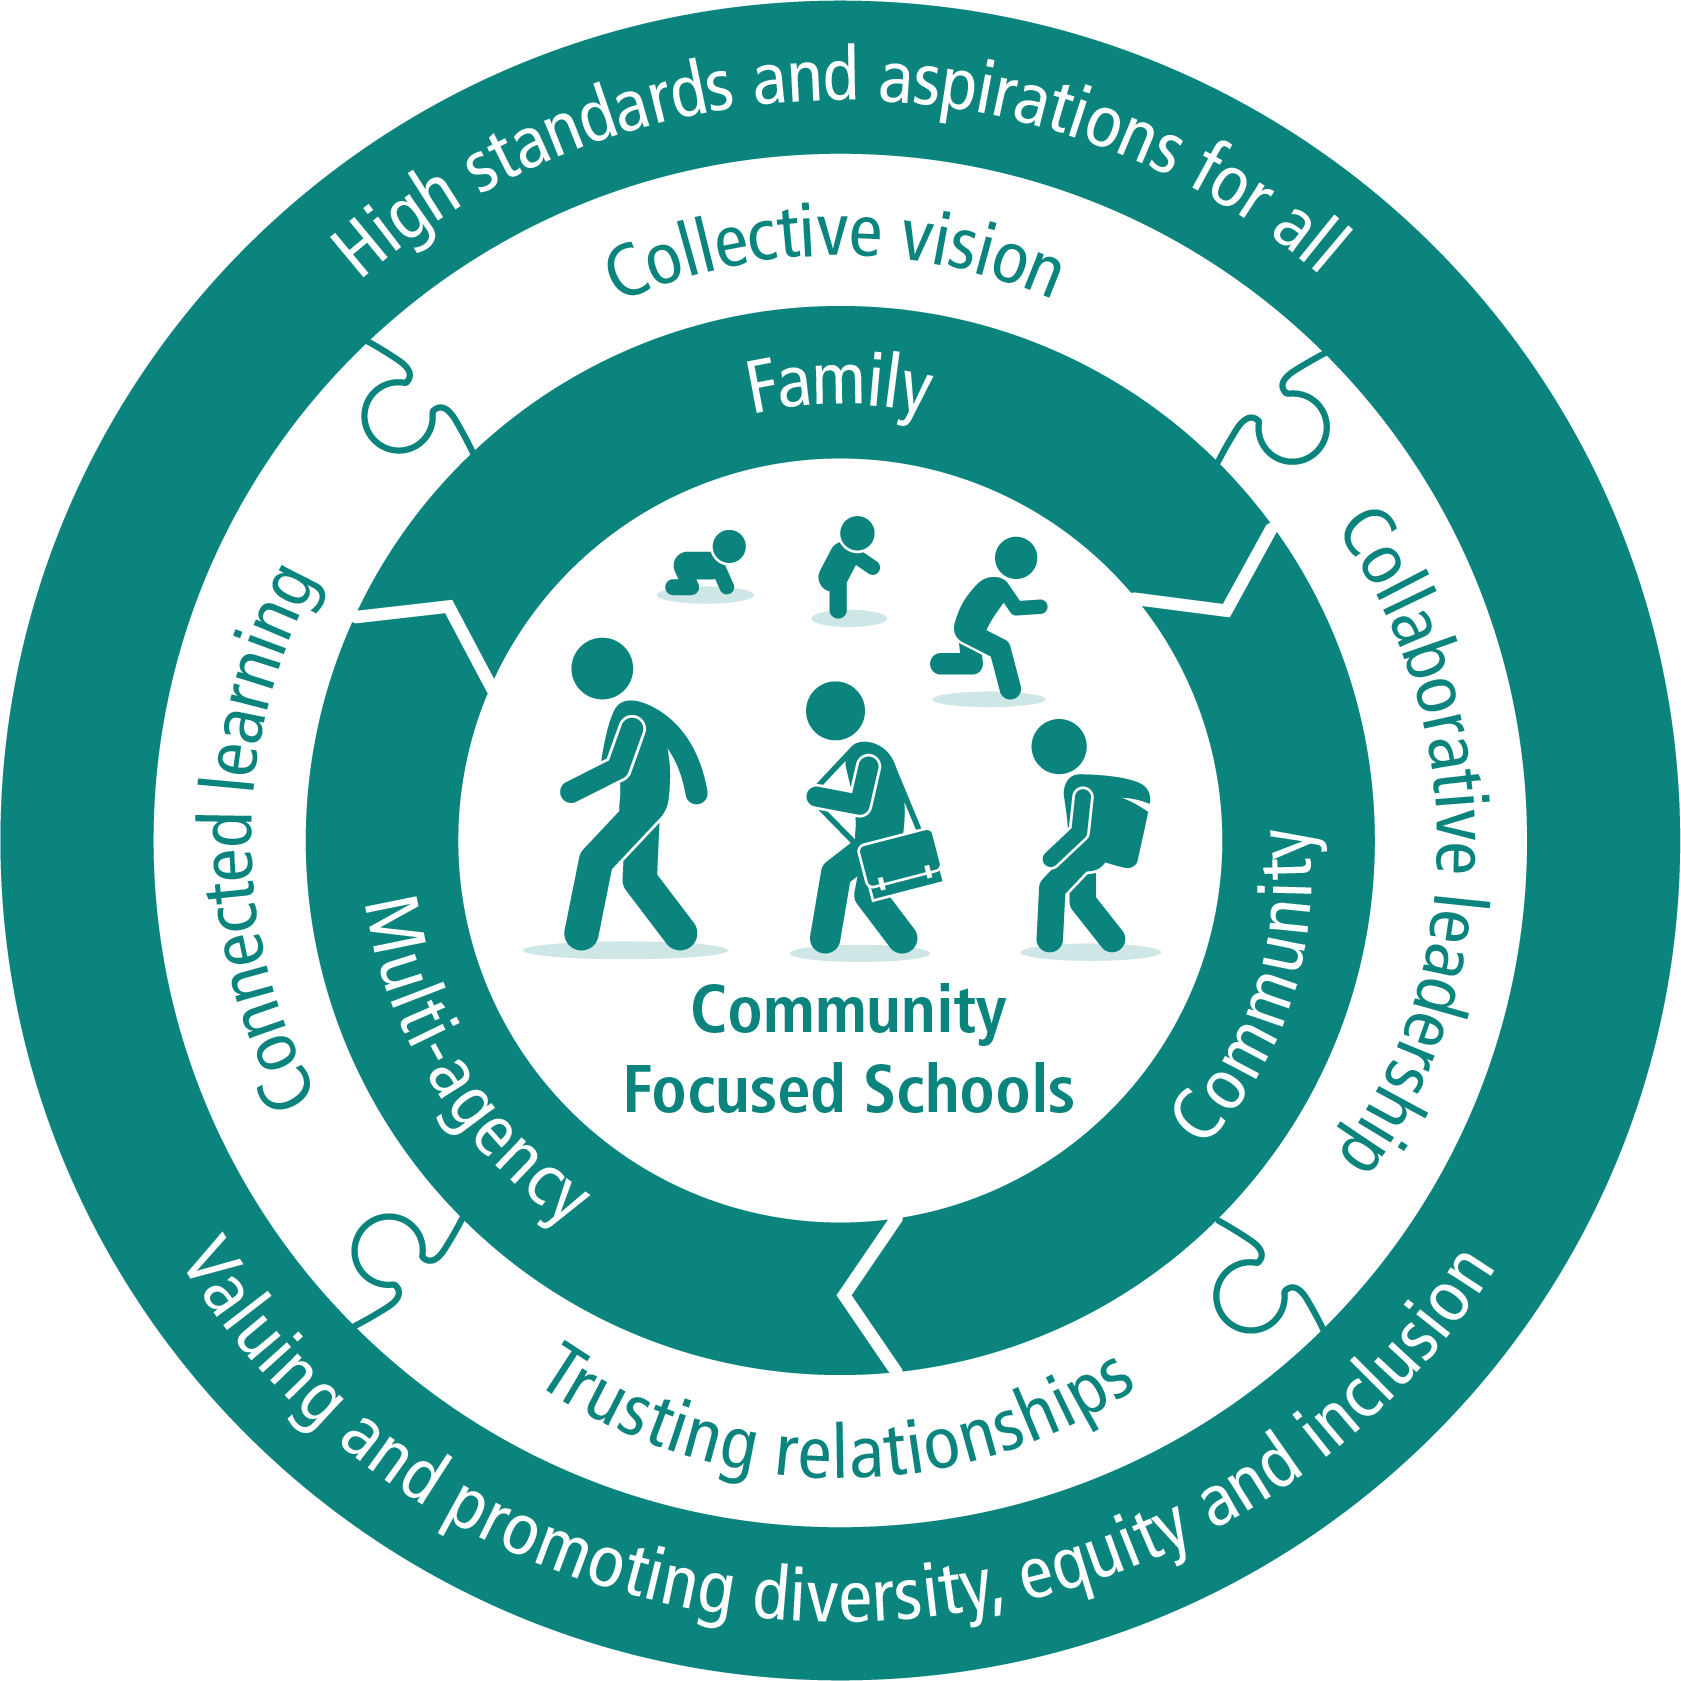 Our model for Community Focused Schools